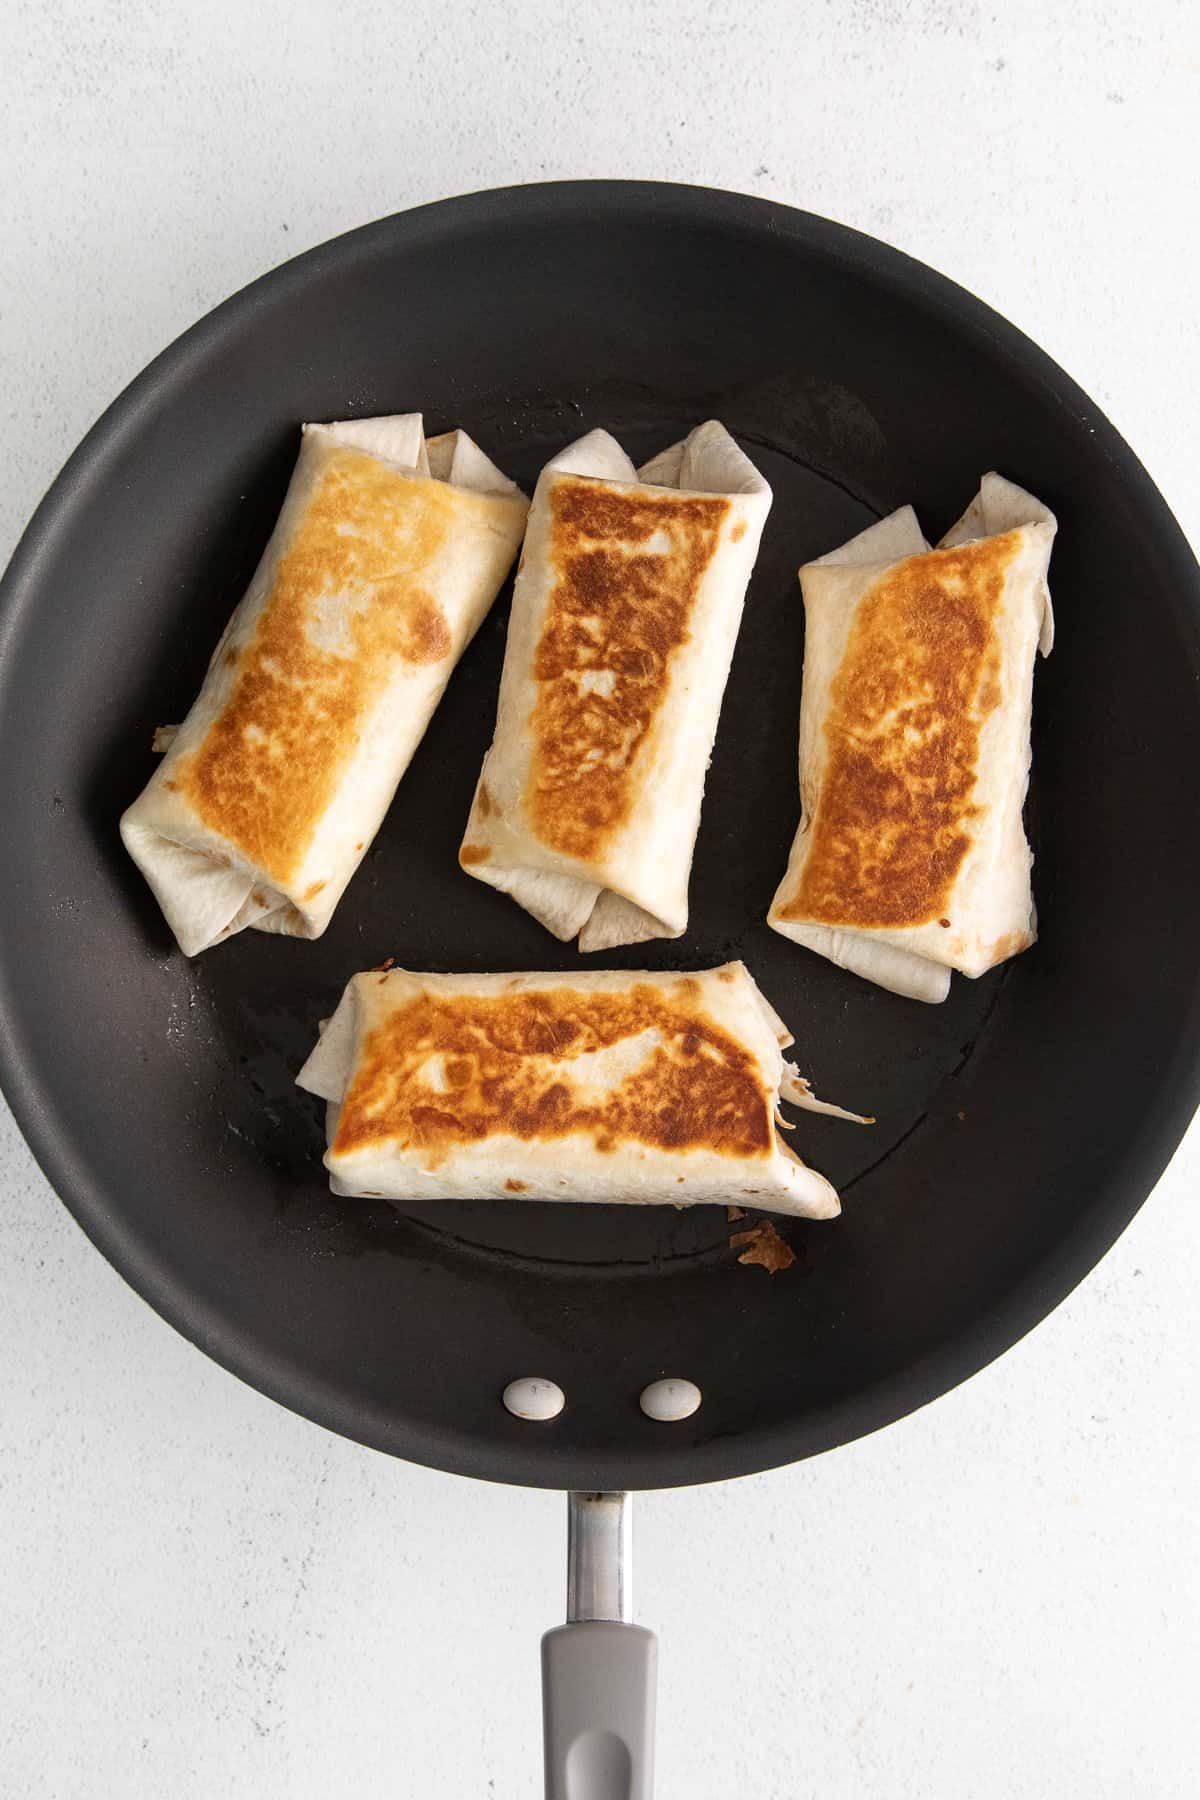 Bean and cheese burritos seared in a skillet.